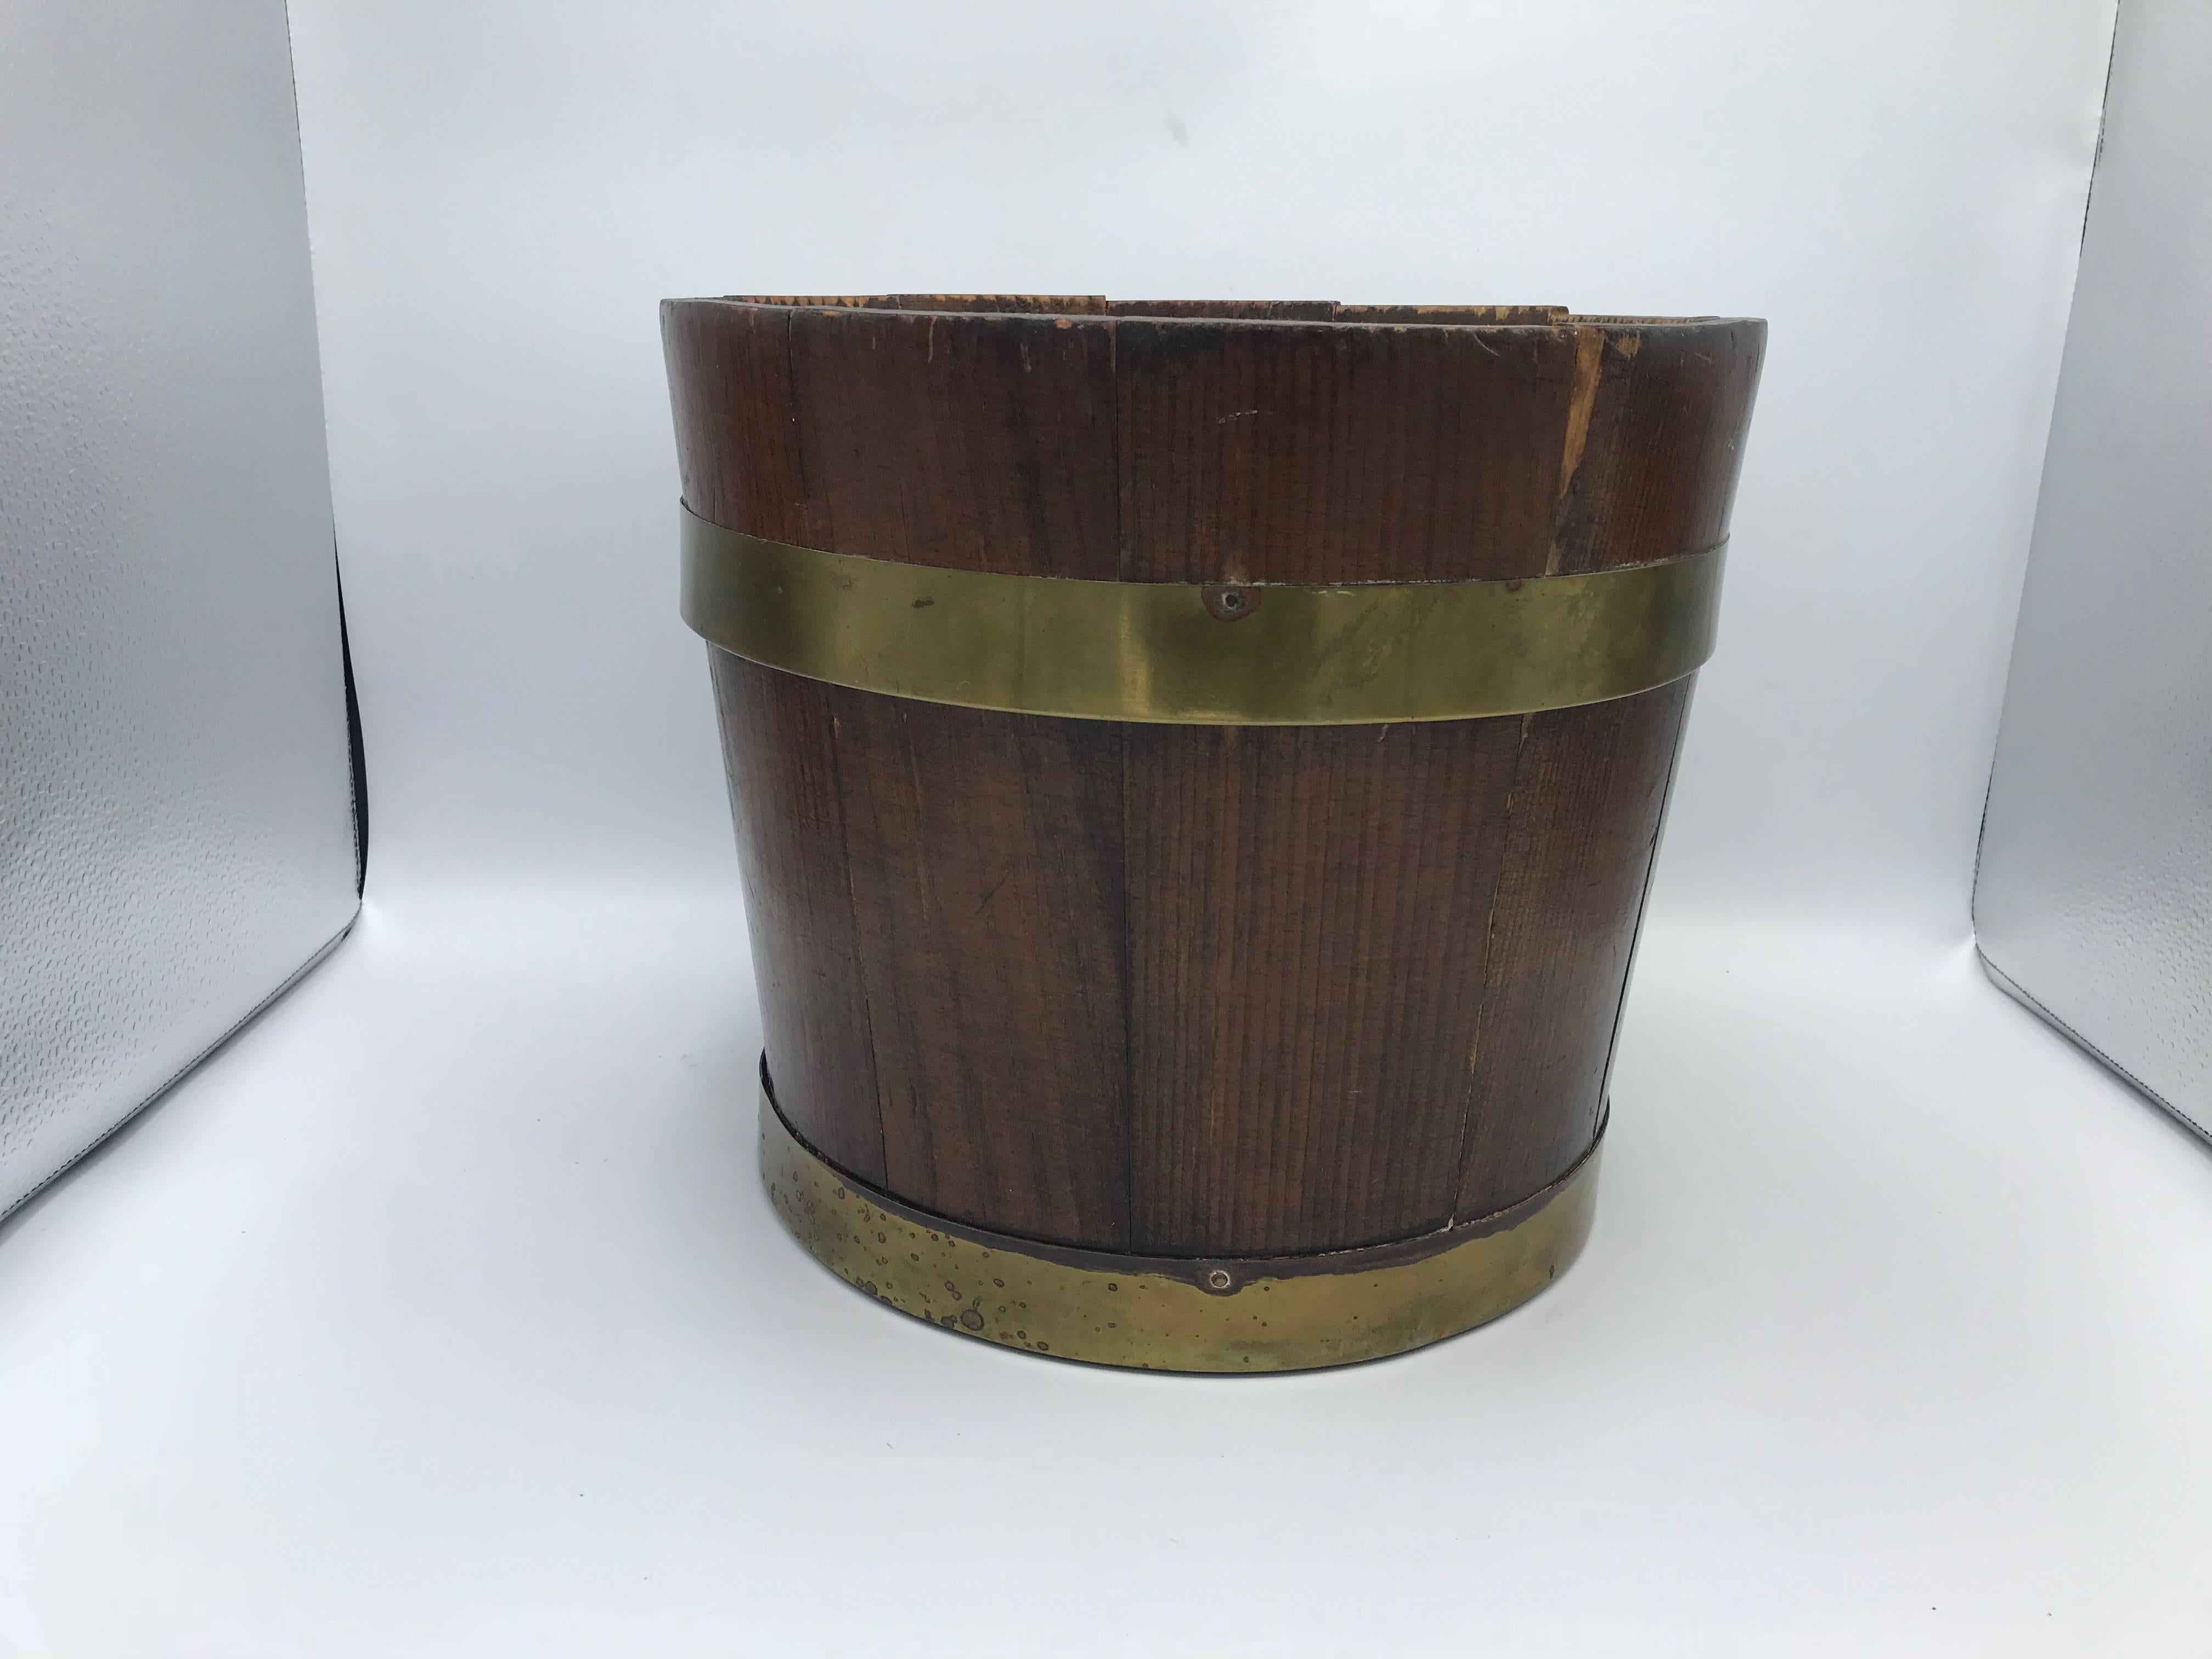 Offered is an exquisite, late 19th century English pine bucket with a brass banded collar. Can be used as a cachepot planter, centrepiece, or waste bin. Lovely allover patina to brass.